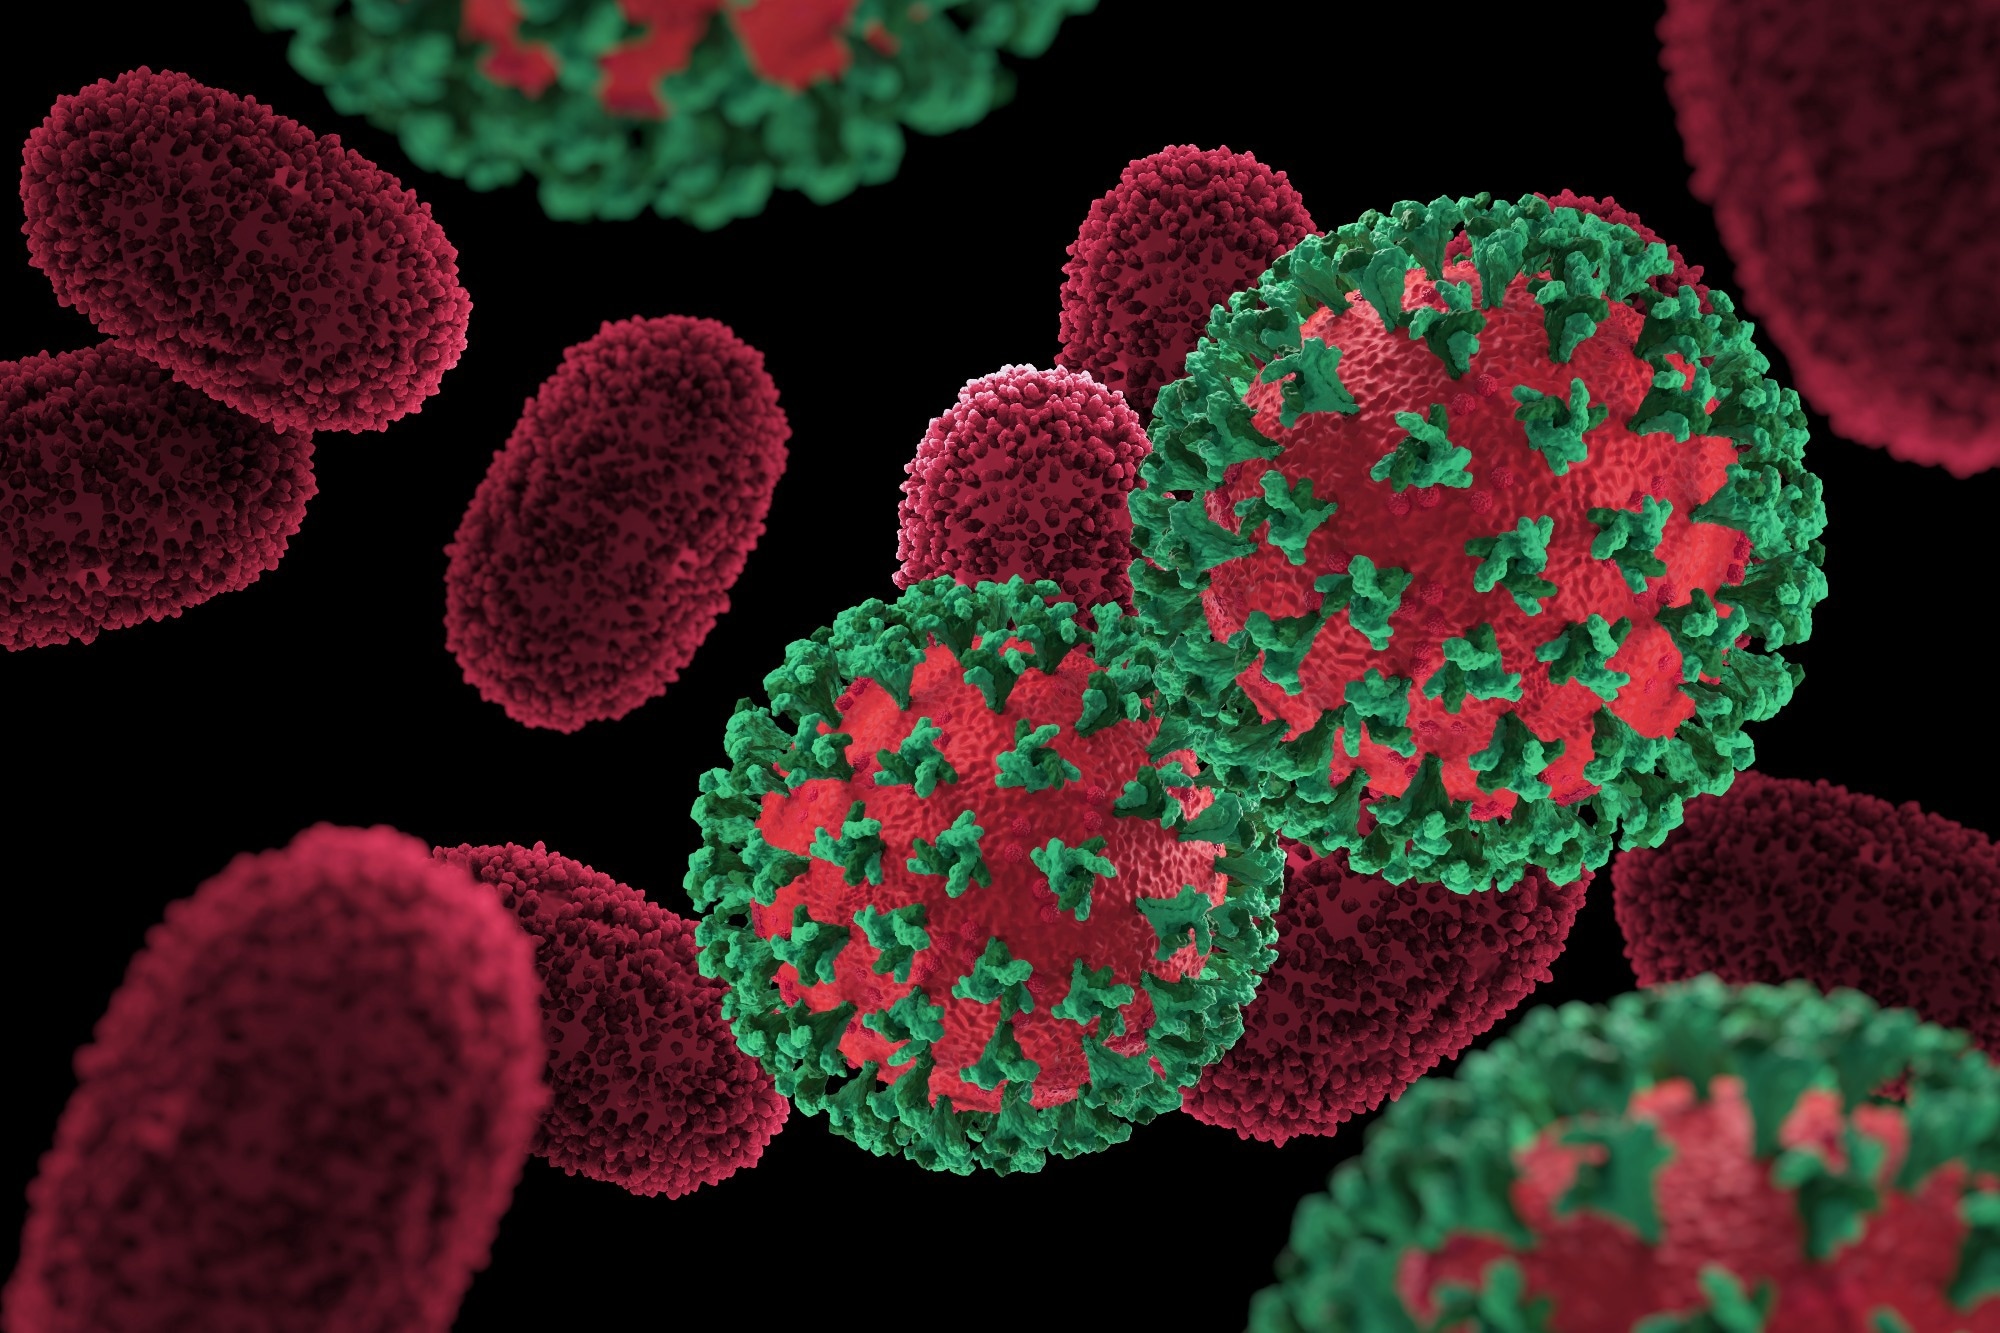 Study: First case of monkeypox virus, SARS-CoV-2 and HIV co-infection. Image Credit: joshimerbin/Shutterstock